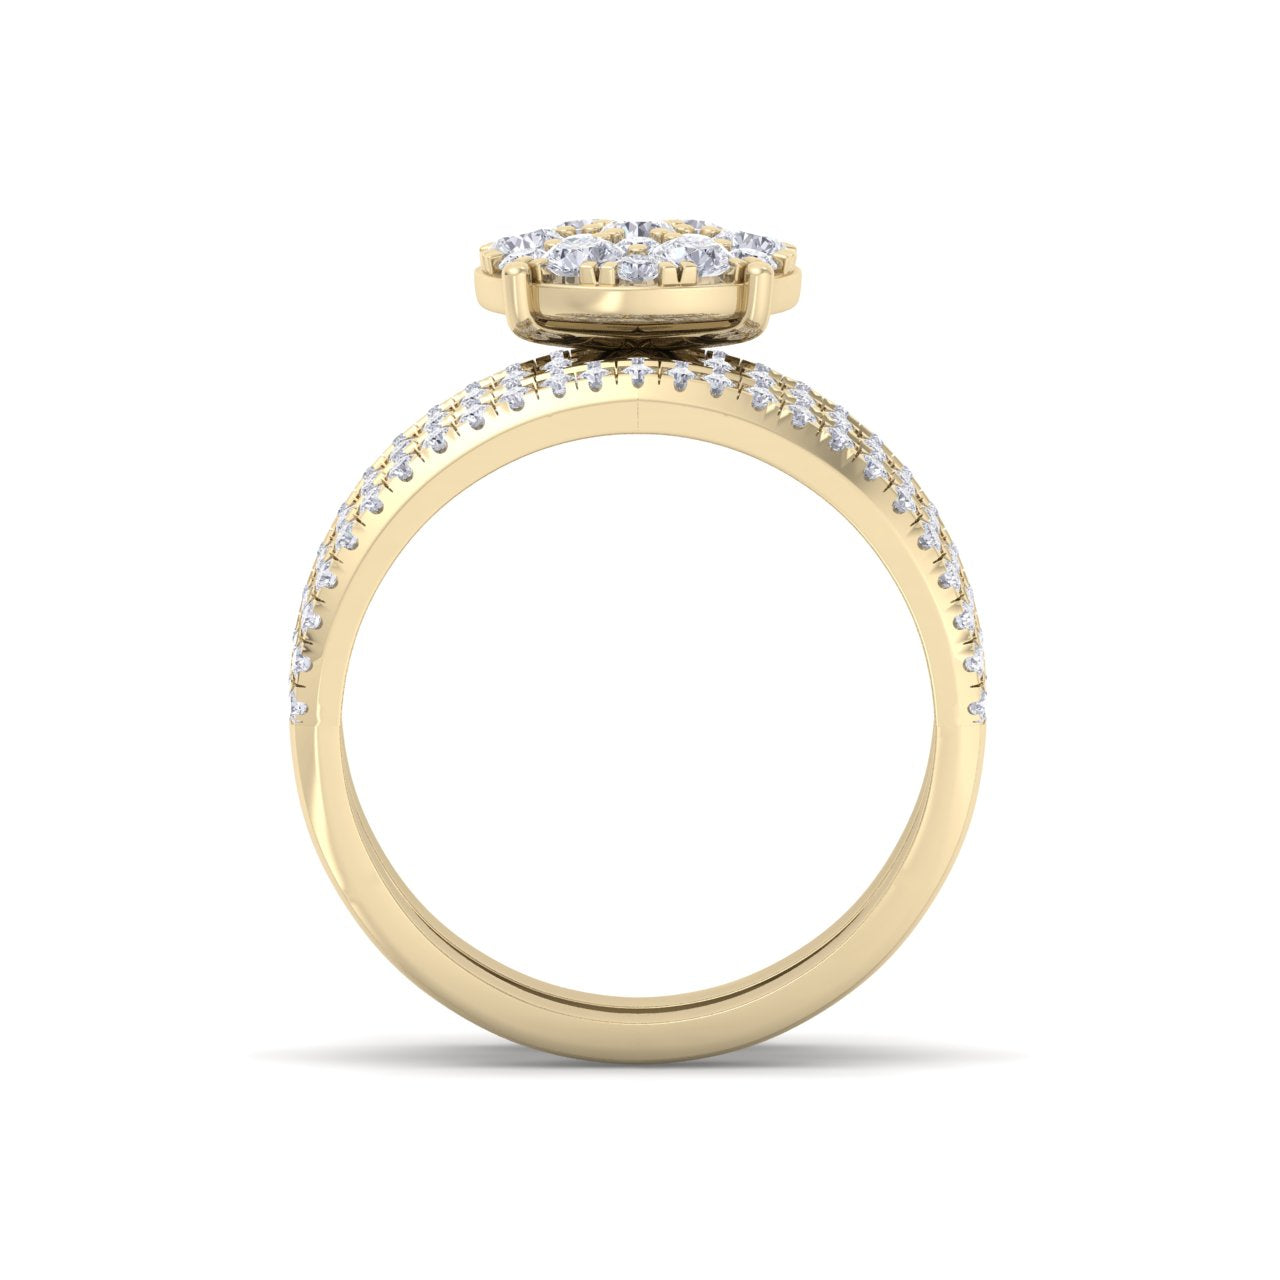 Bridal set in yellow gold with white diamonds of 1.48 ct in weight